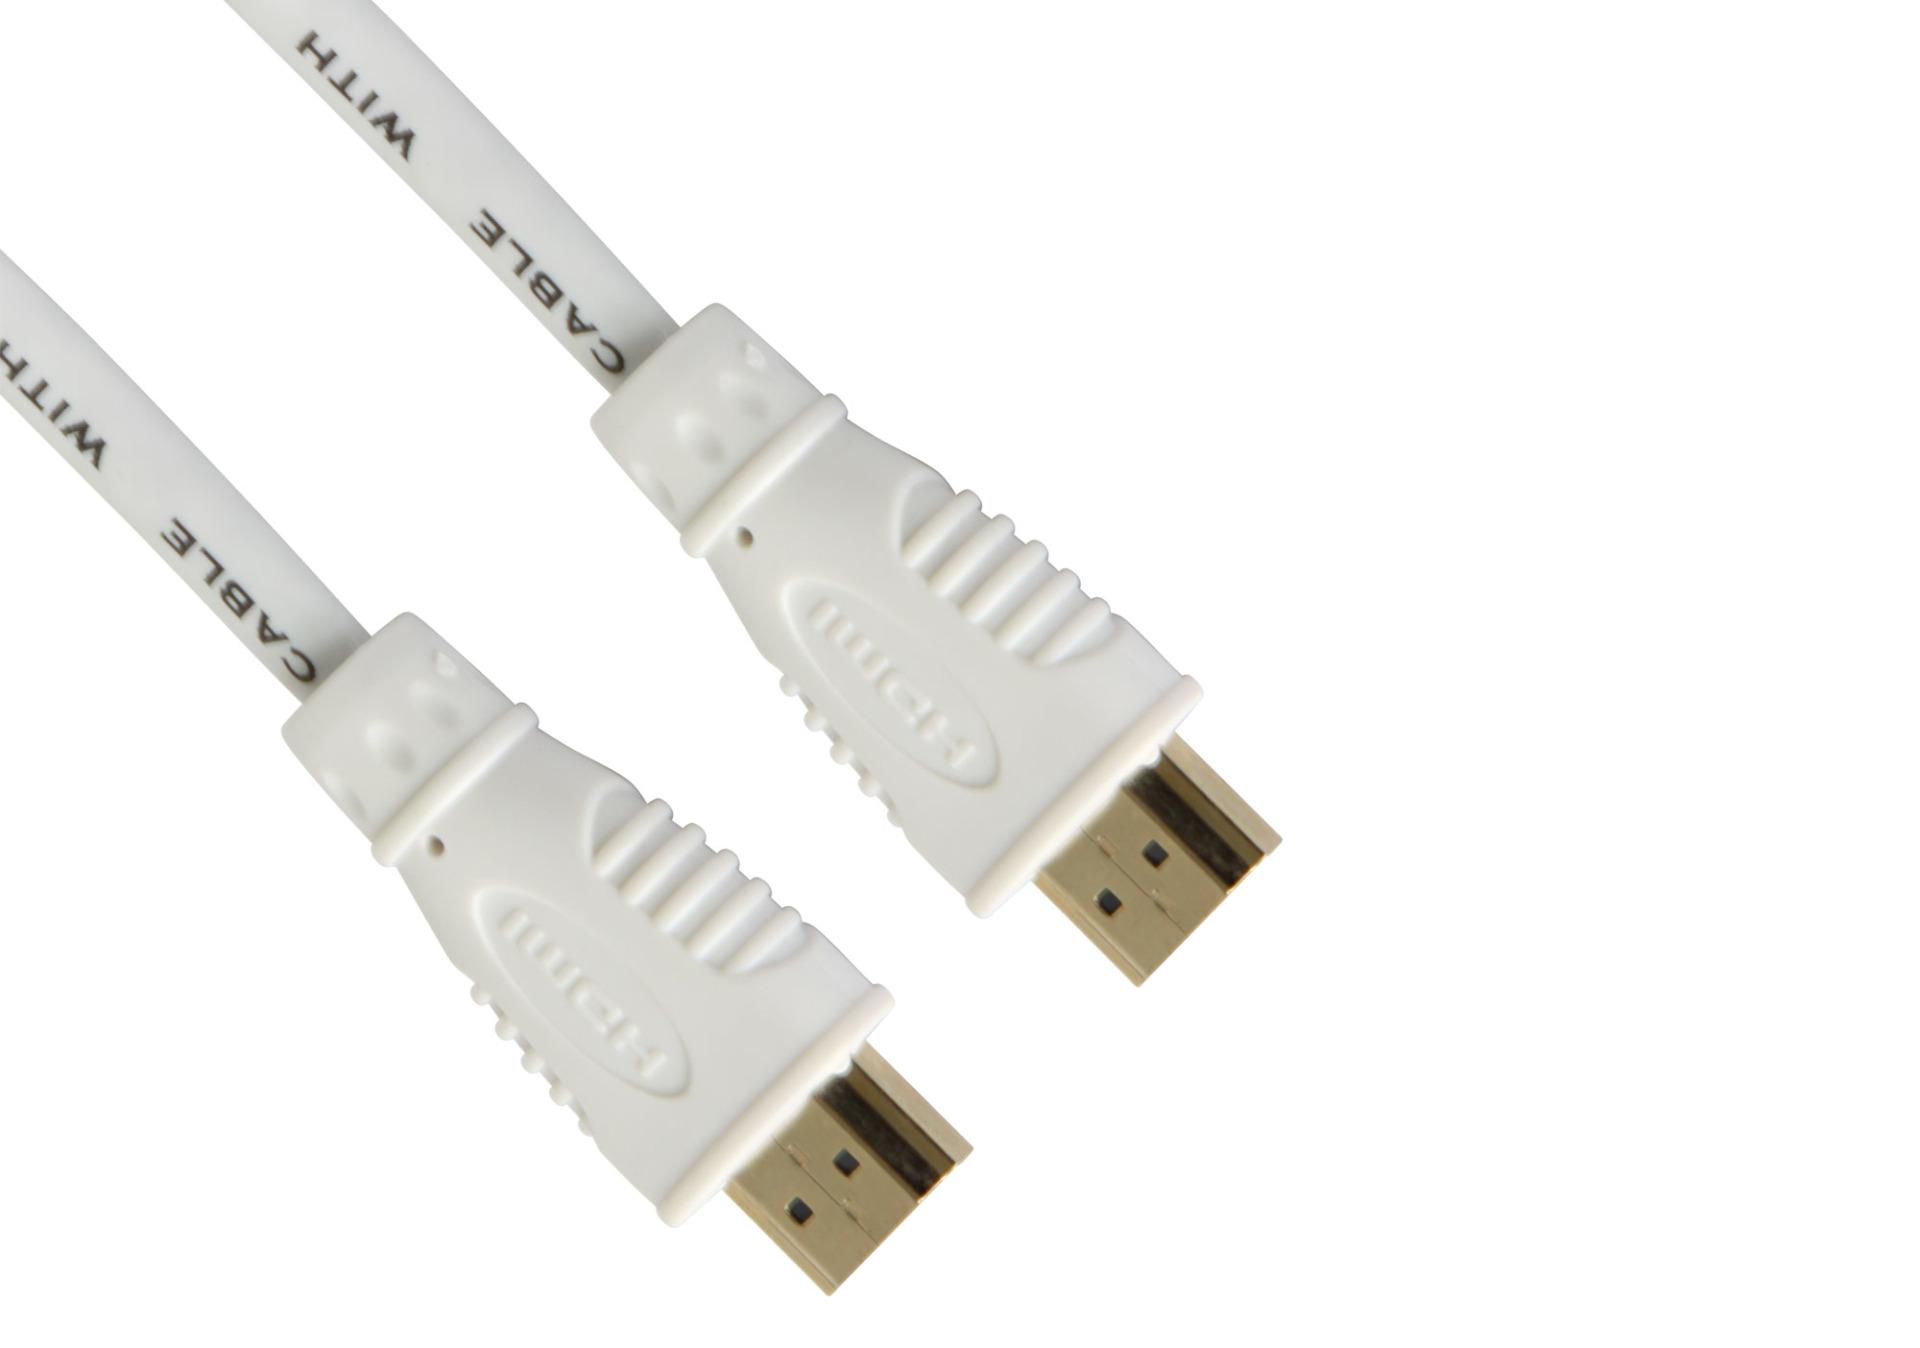 High Speed HDMI Cable with Ethernet, white, 0.5m